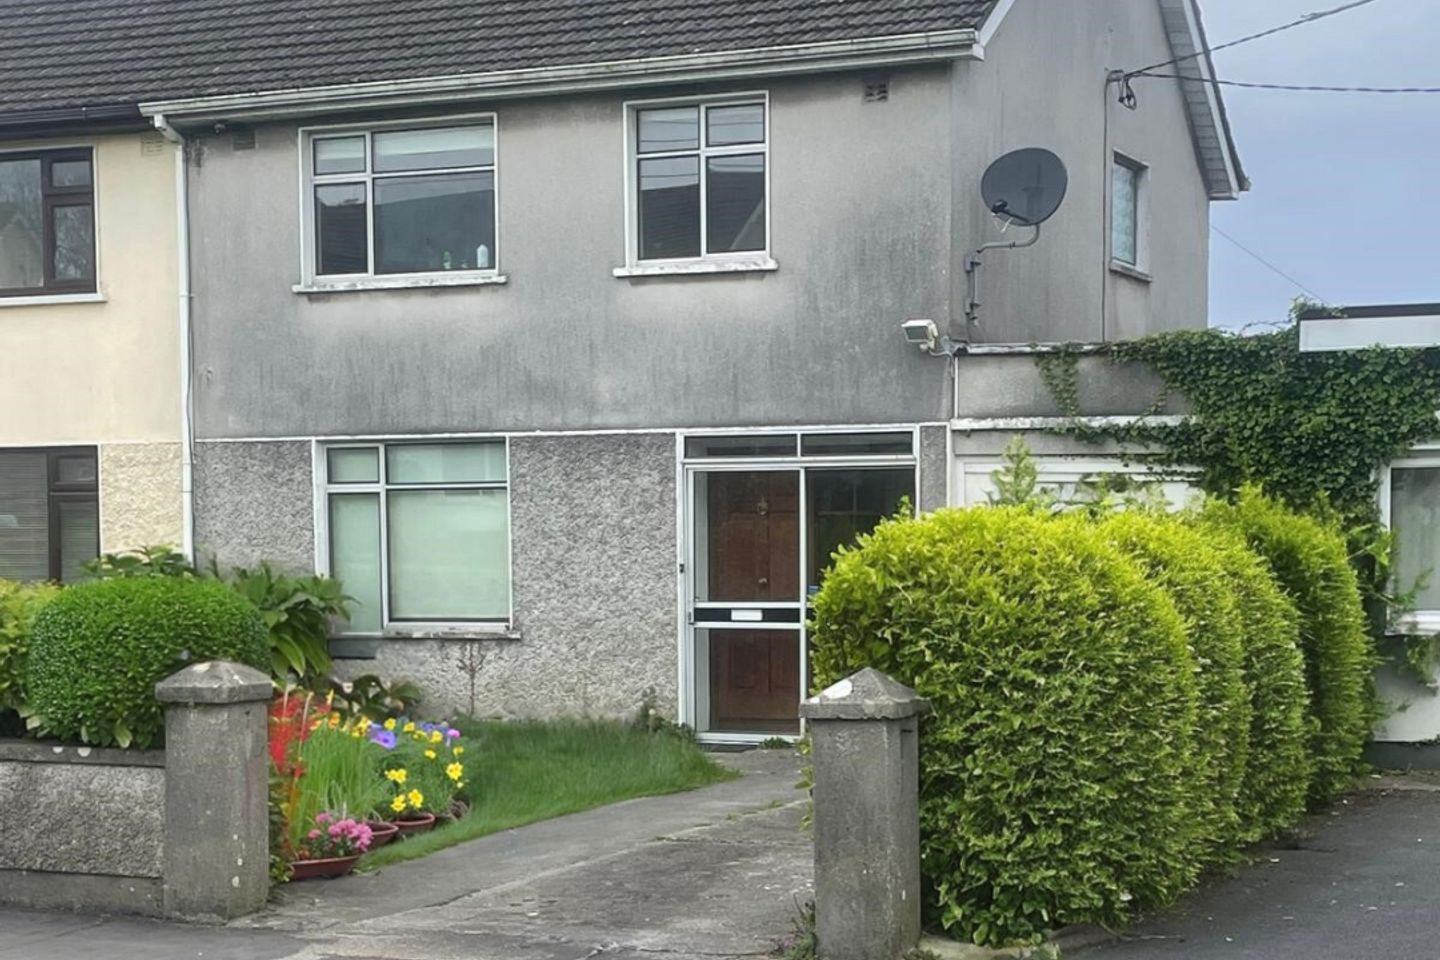 Renmore Park, Renmore, Co. Galway, H91WTR7